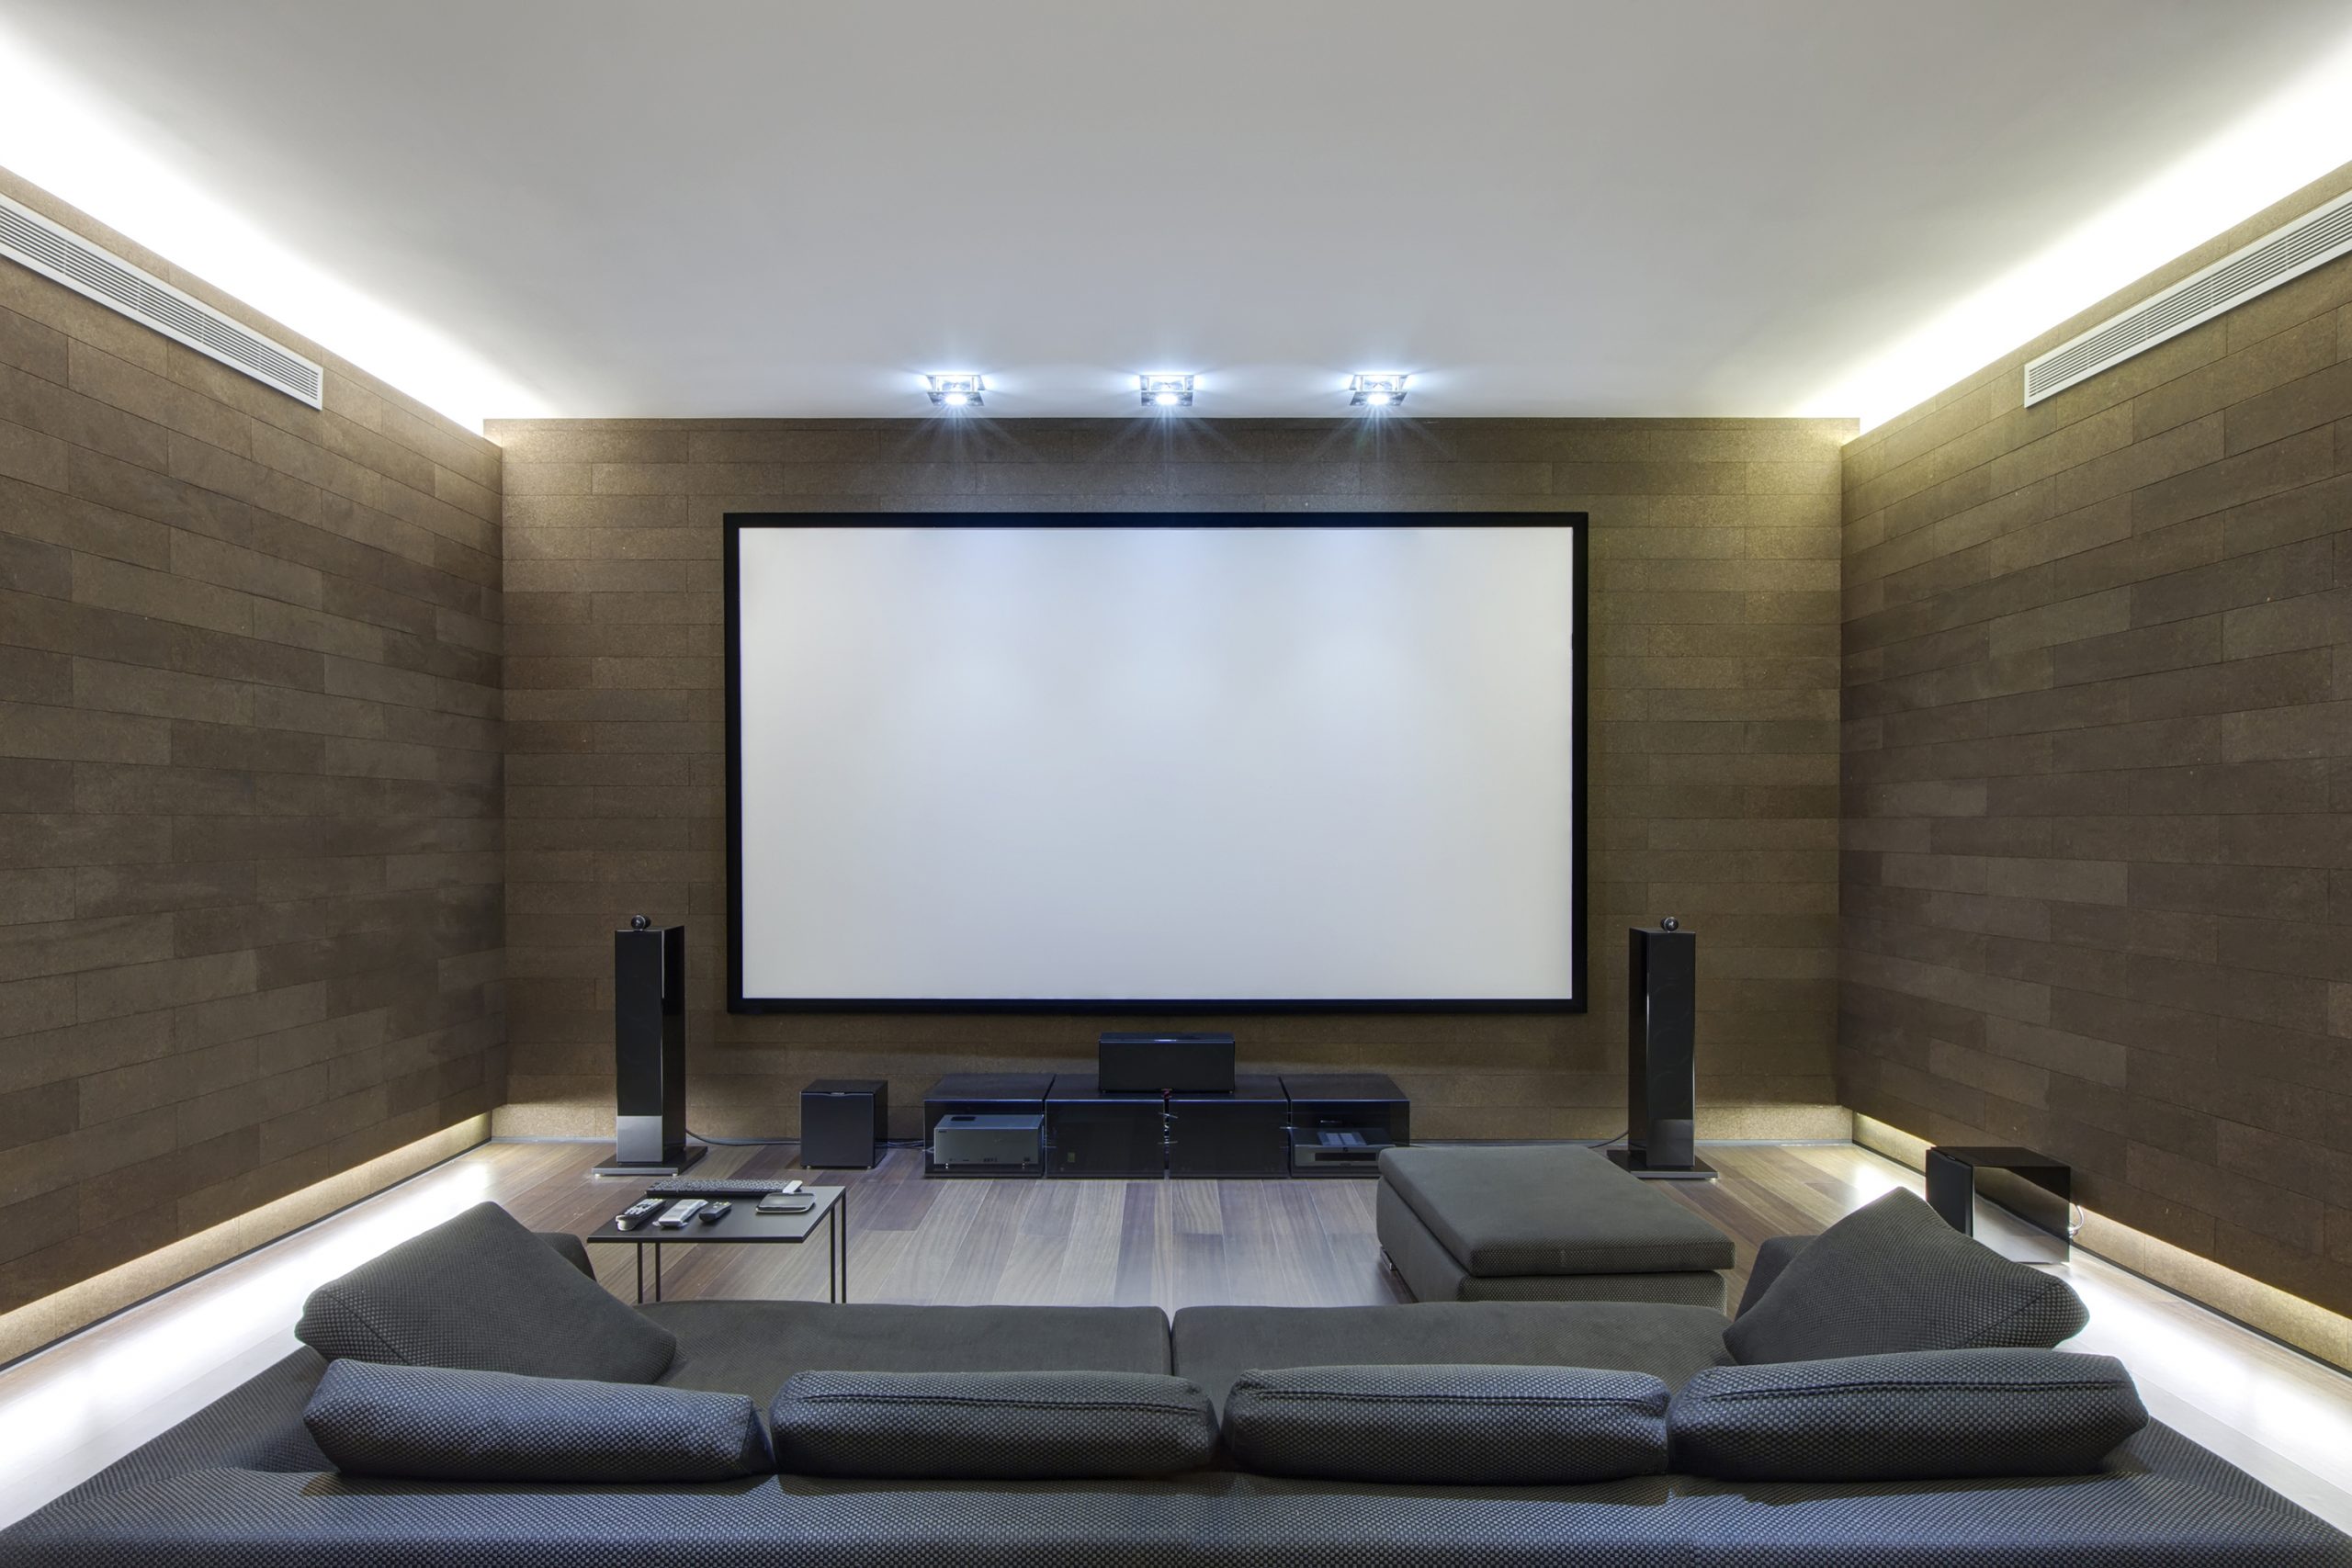 If you have always dreamed of having a home theater, check out one of these incredibly easy home theater designs. You will love these home theater design ideas! 